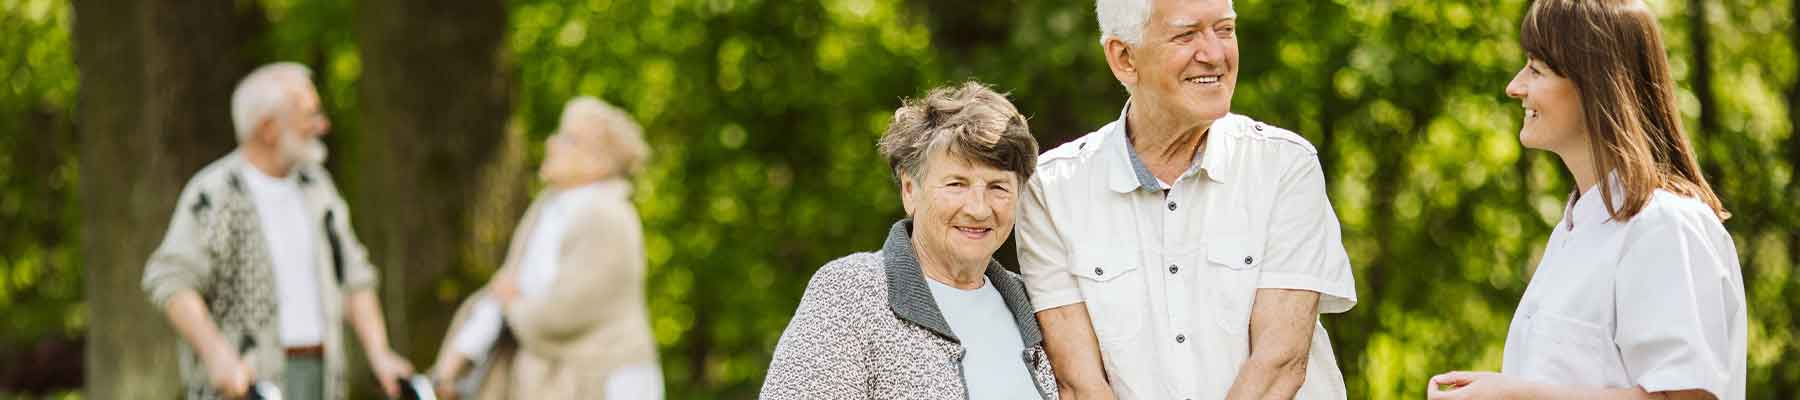 Find the Perfect Caregiver for Your Loved One